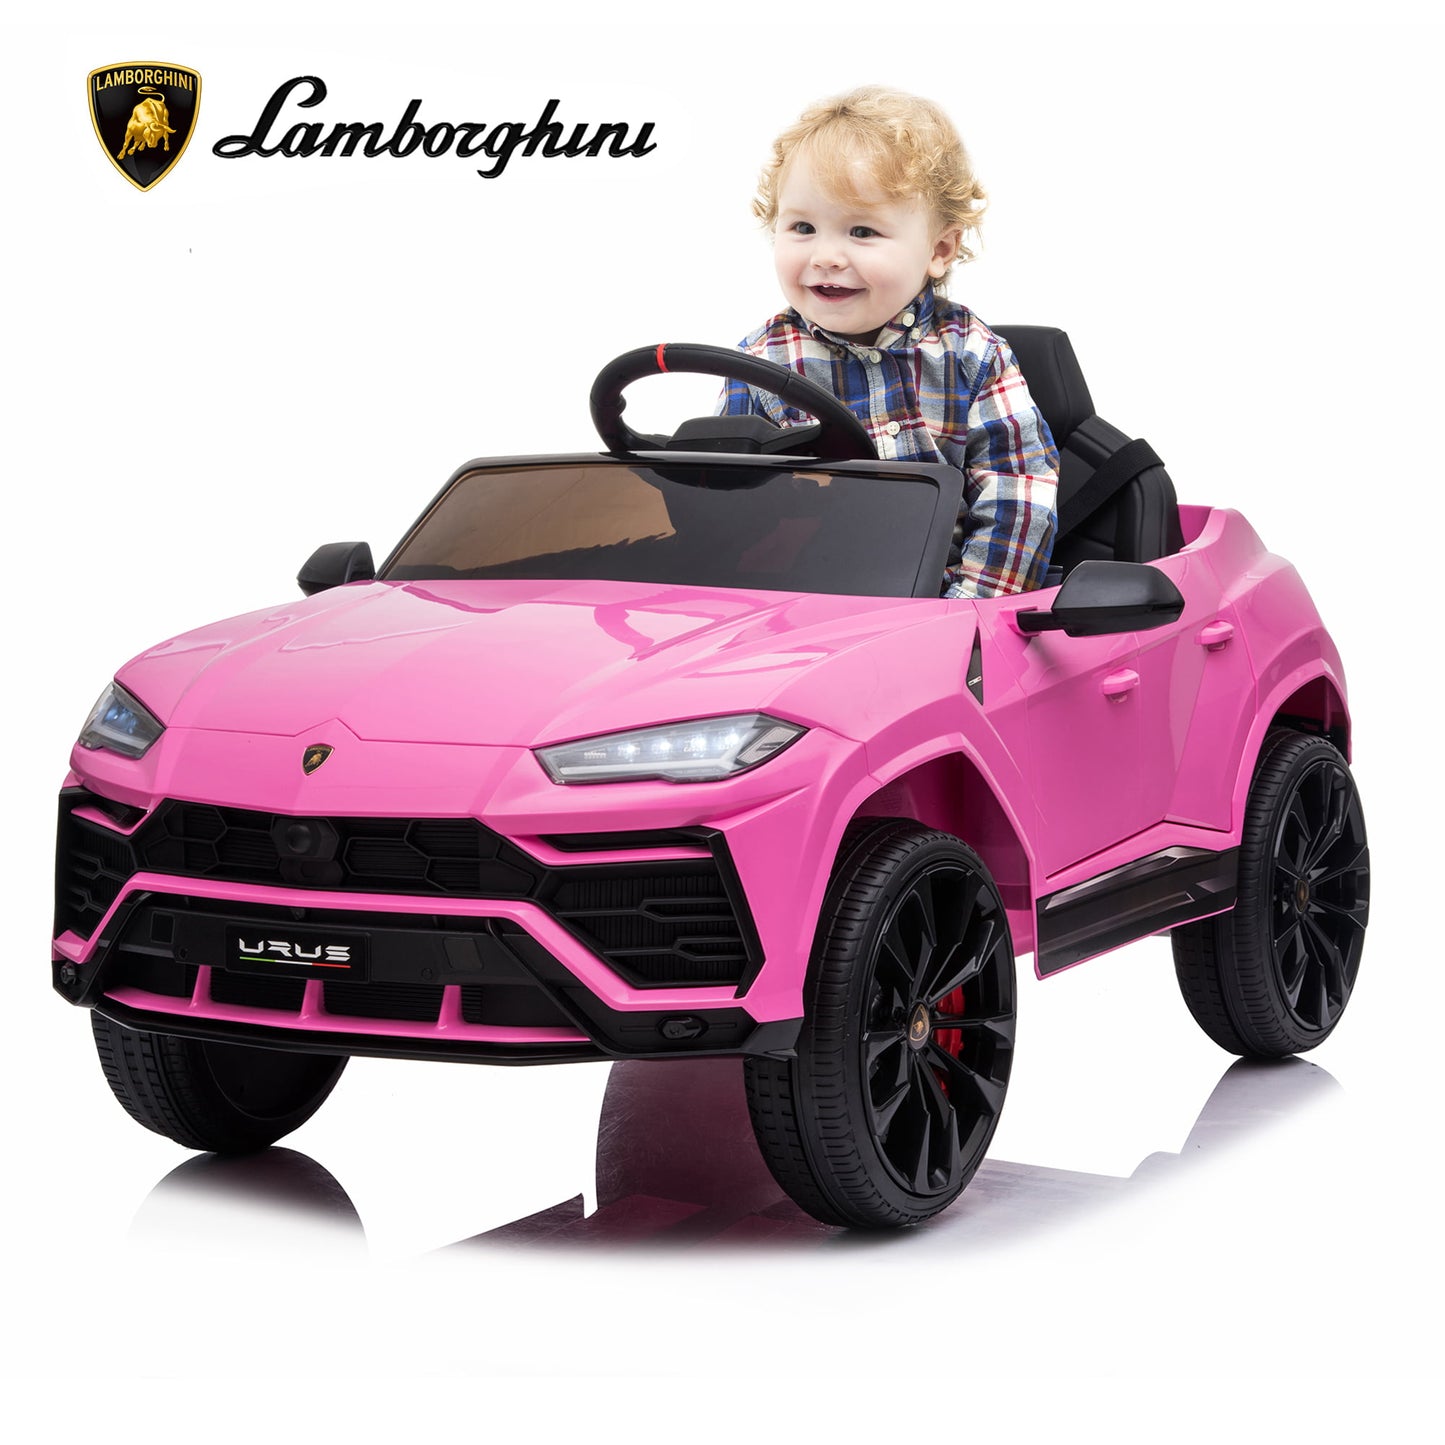 iRerts Licensed Lamborghini 12 V Battery Powered Ride on Cars with Remote Control,3 Speeds,Kids Boys Girls Electric Vehicles Ride-on Toys with MP3 Player, LED Lights,Horn, Pink